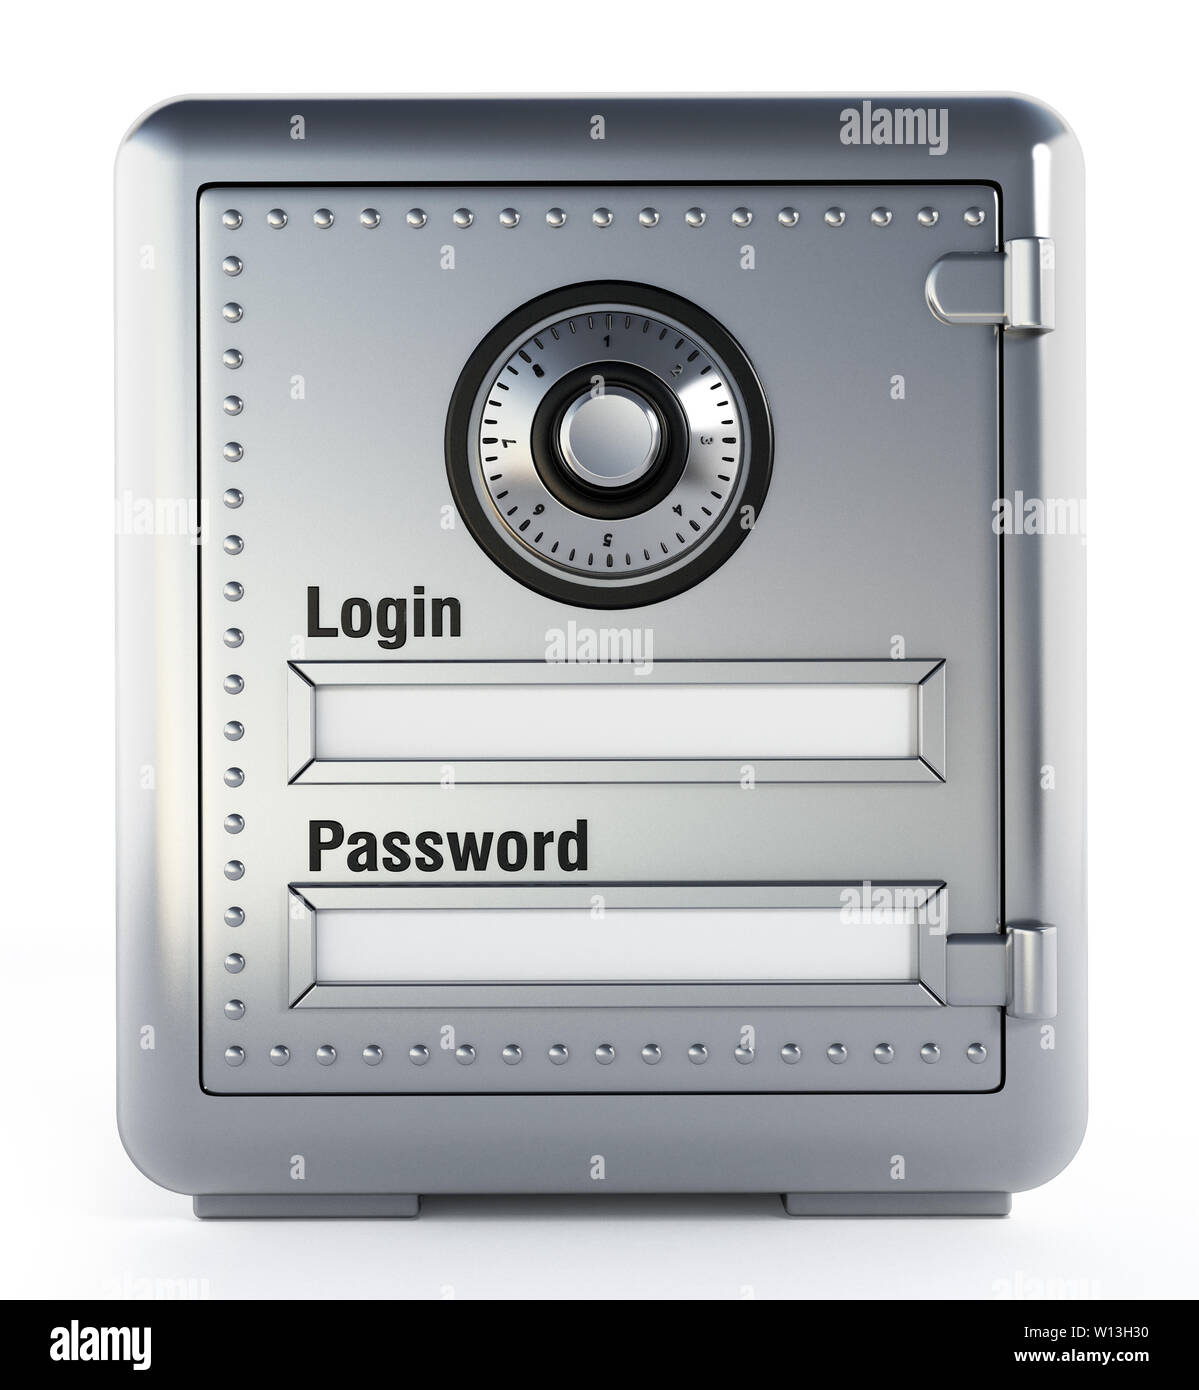 Steel safe with login and password screen. 3D illustration. Stock Photo